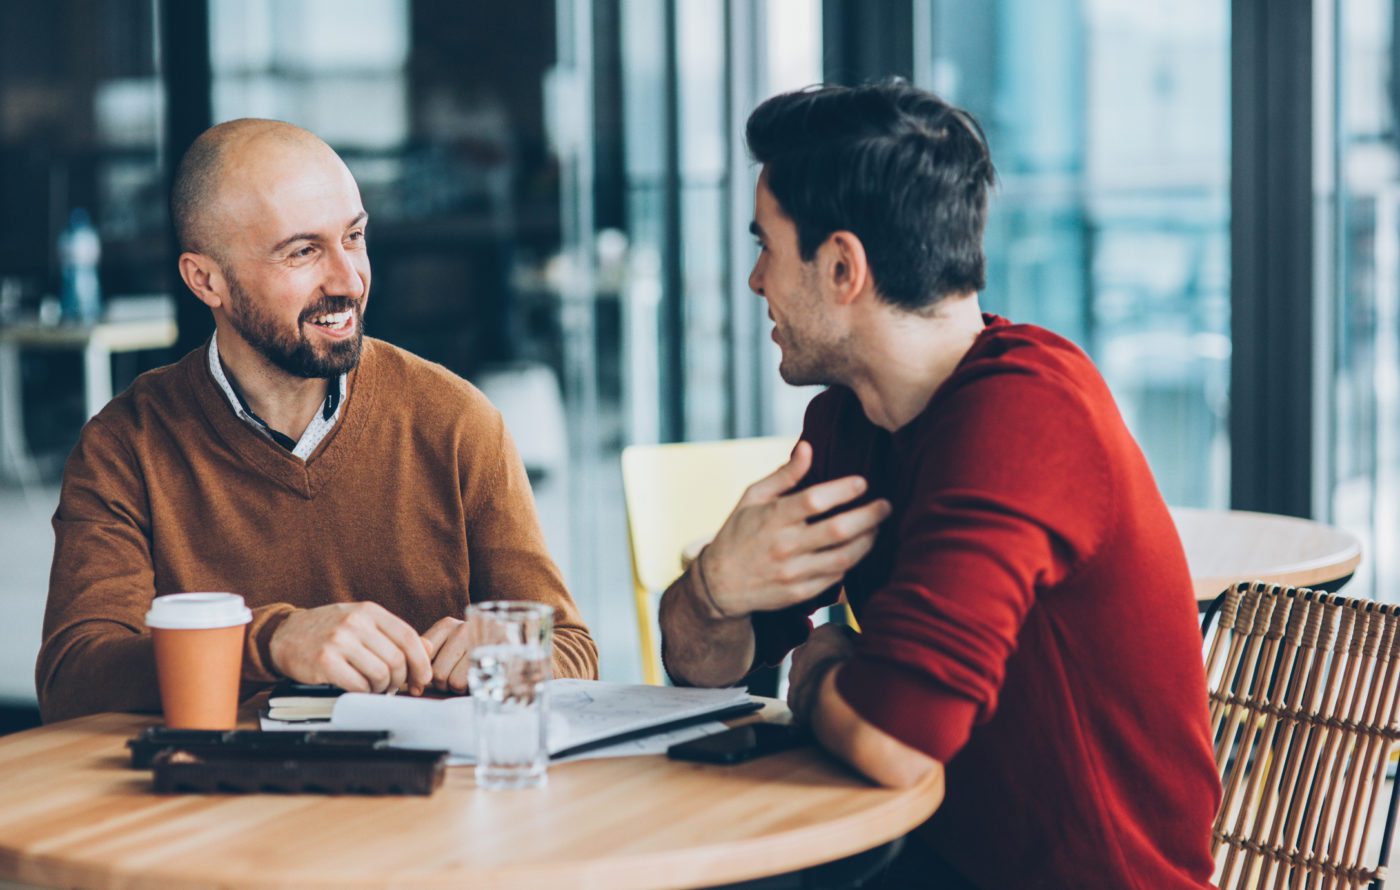 4 Steps To Socially Connect With Anyone | All Pro Dad